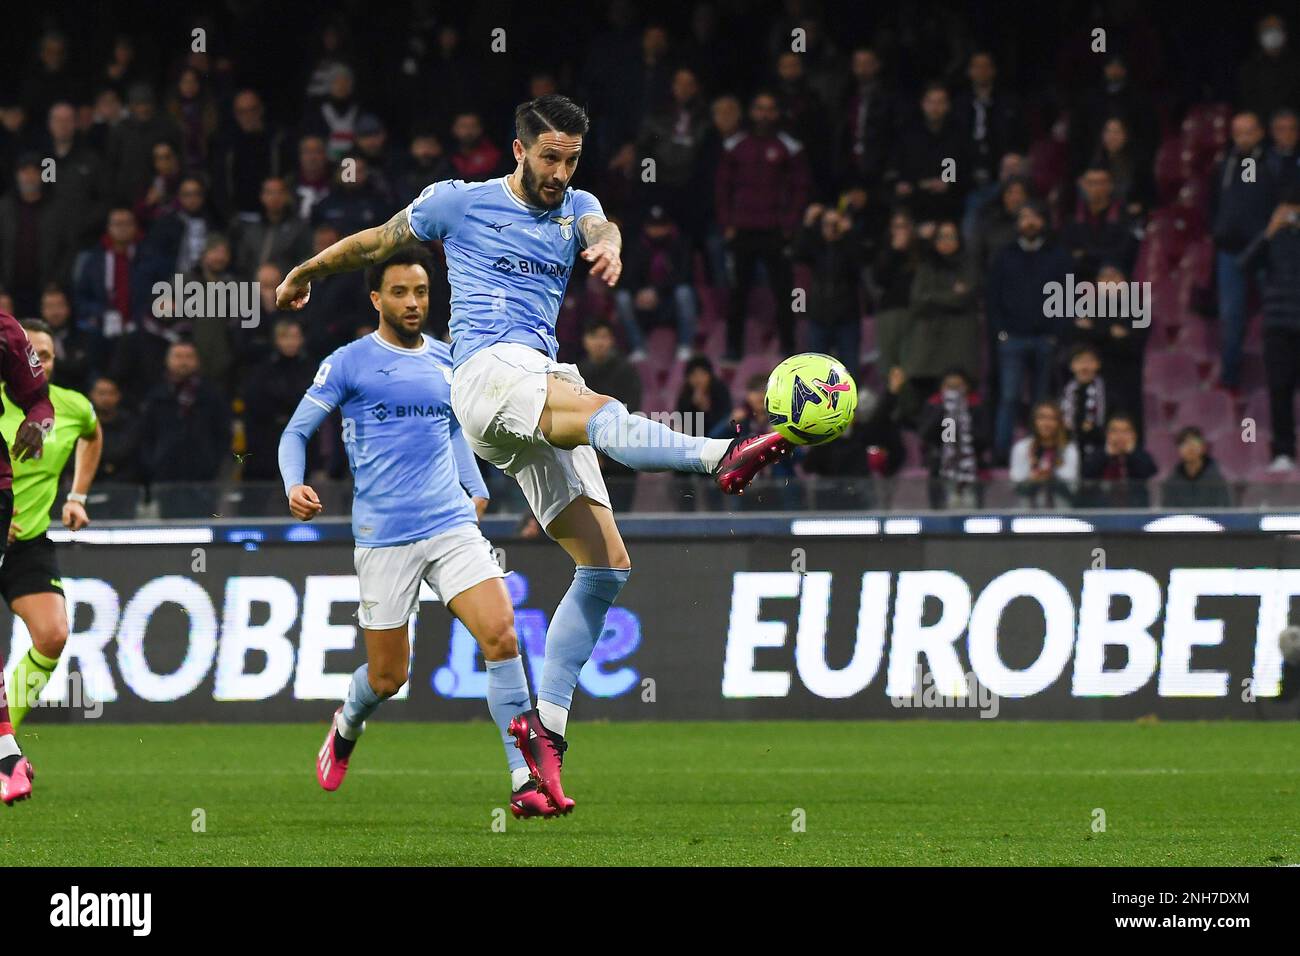 SALERNO, ITALY - FEBRUARY, 19: Luis Alberto of SS Lazio in action during the Serie A match between US Salernitana and SS Lazio at Stadio Arechi, Saler Stock Photo